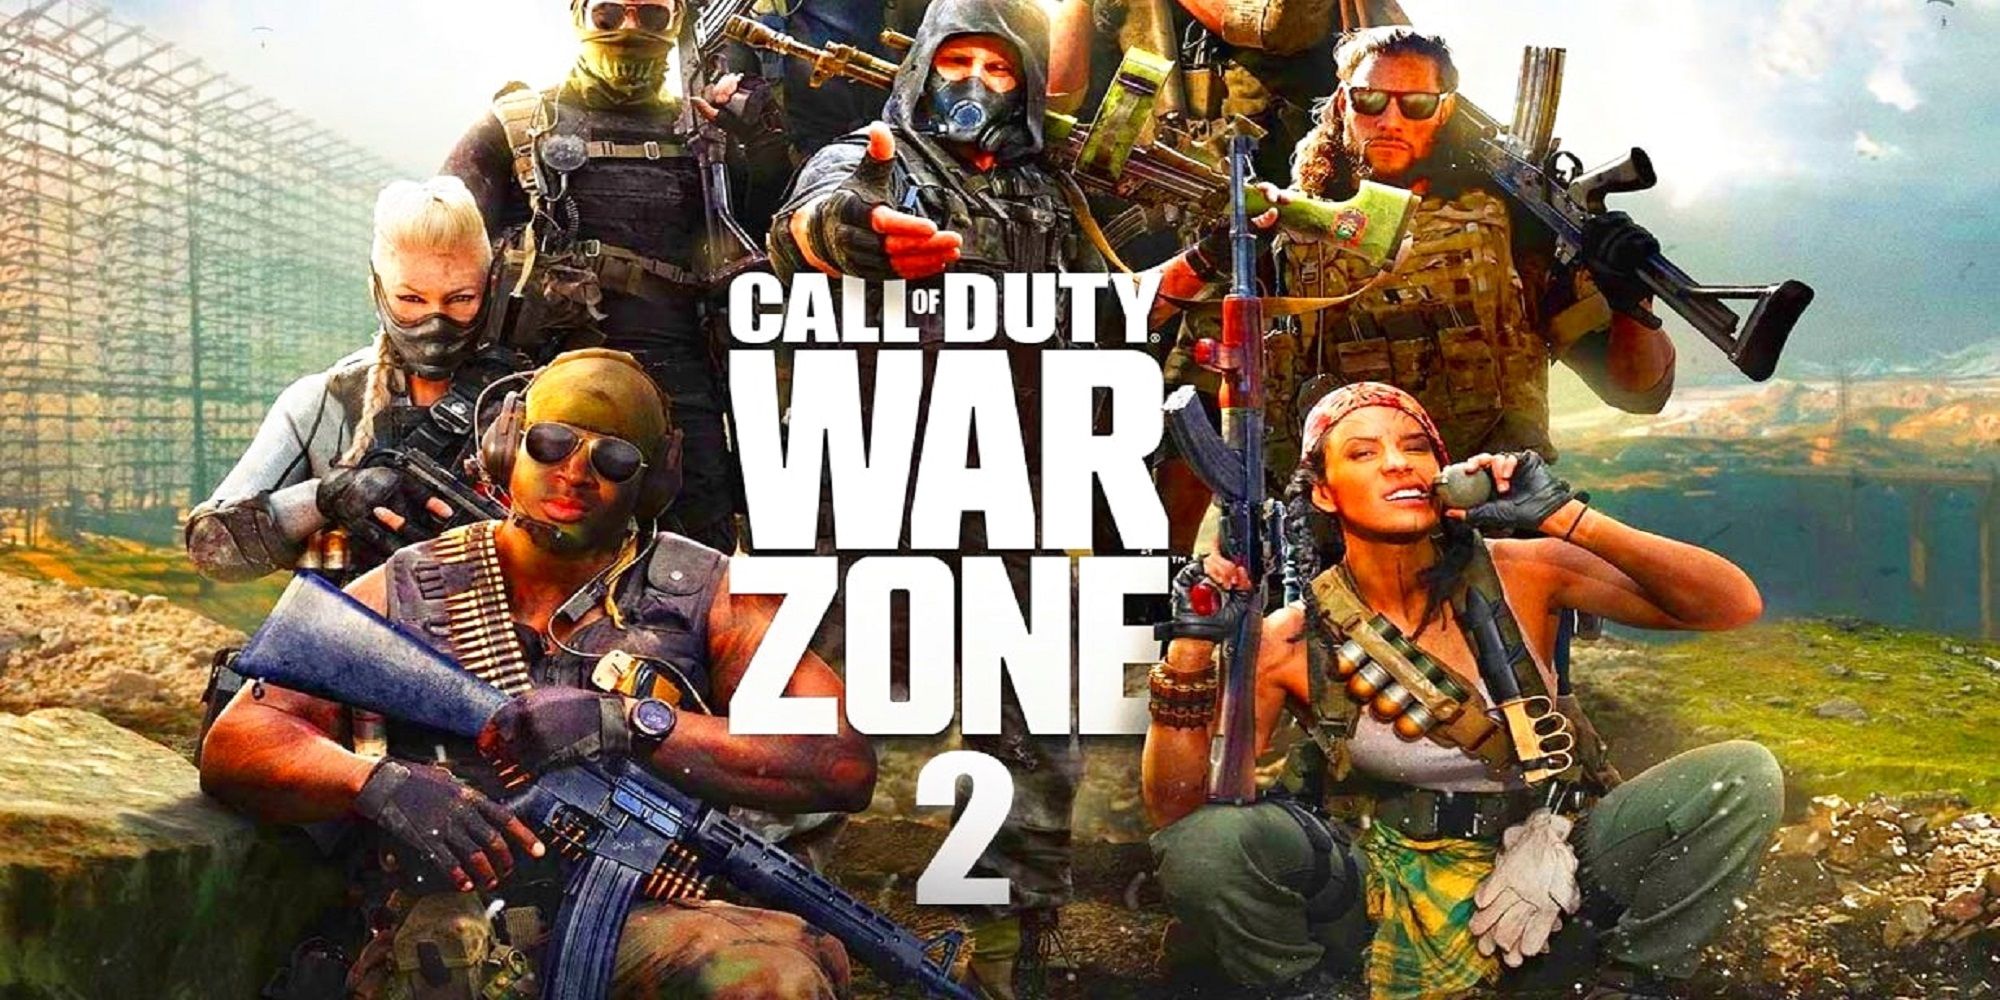 Call of Duty Warzone 2 Promo Image Showing New Specailists